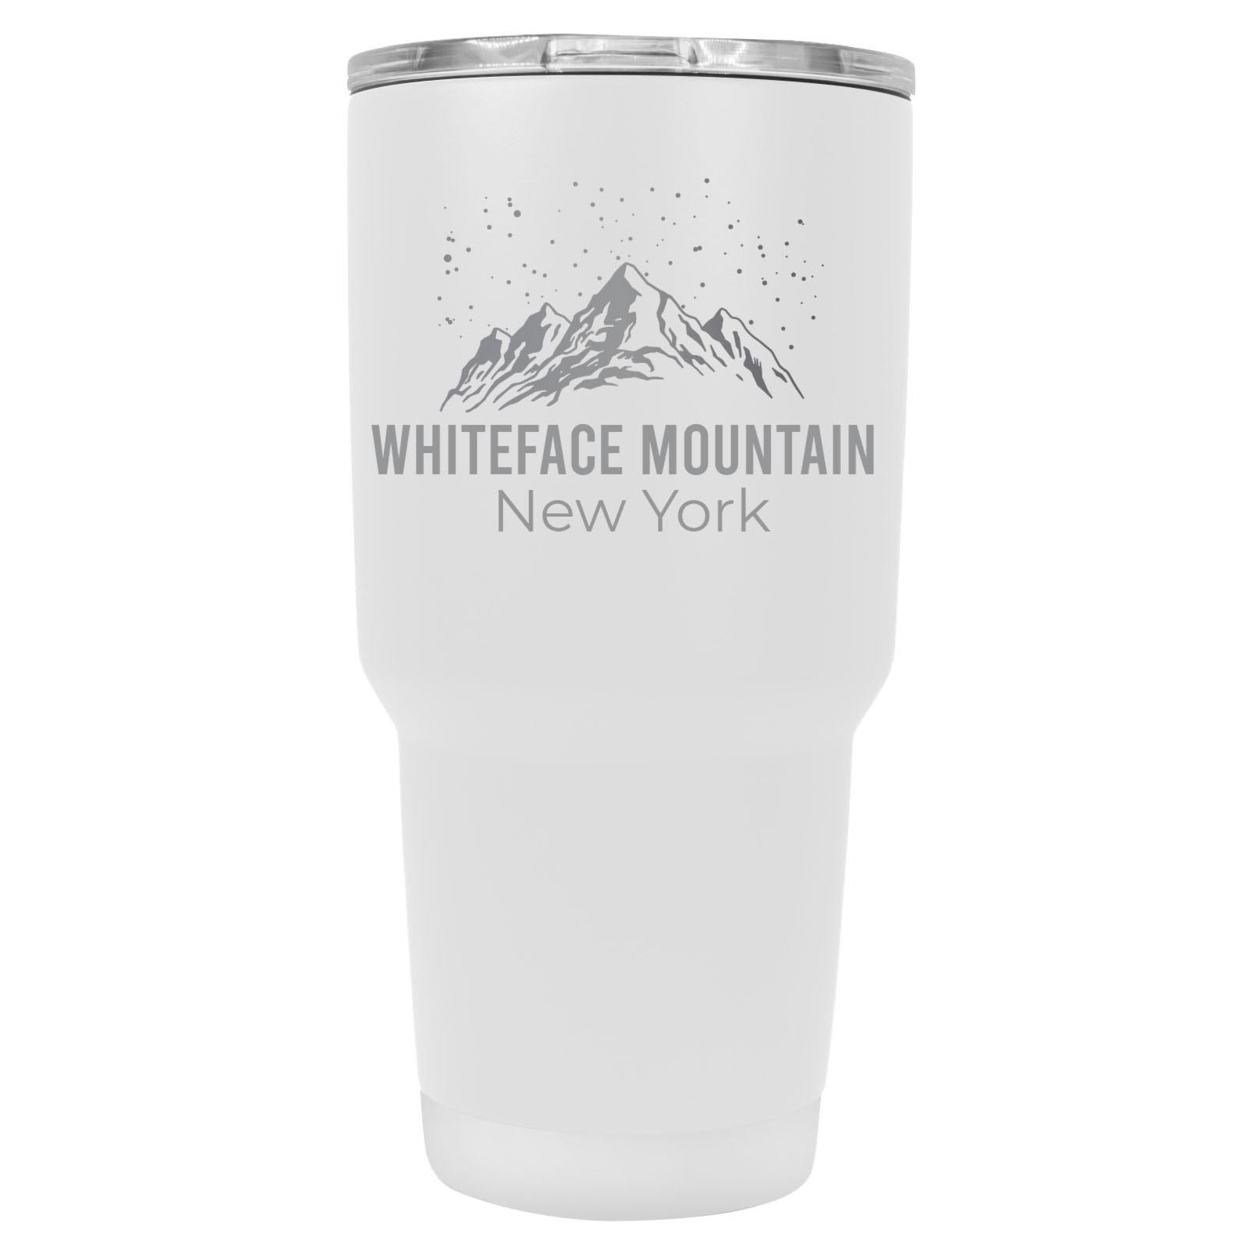 Whiteface Mountain New York Ski Snowboard Winter Souvenir Laser Engraved 24 Oz Insulated Stainless Steel Tumbler - Red